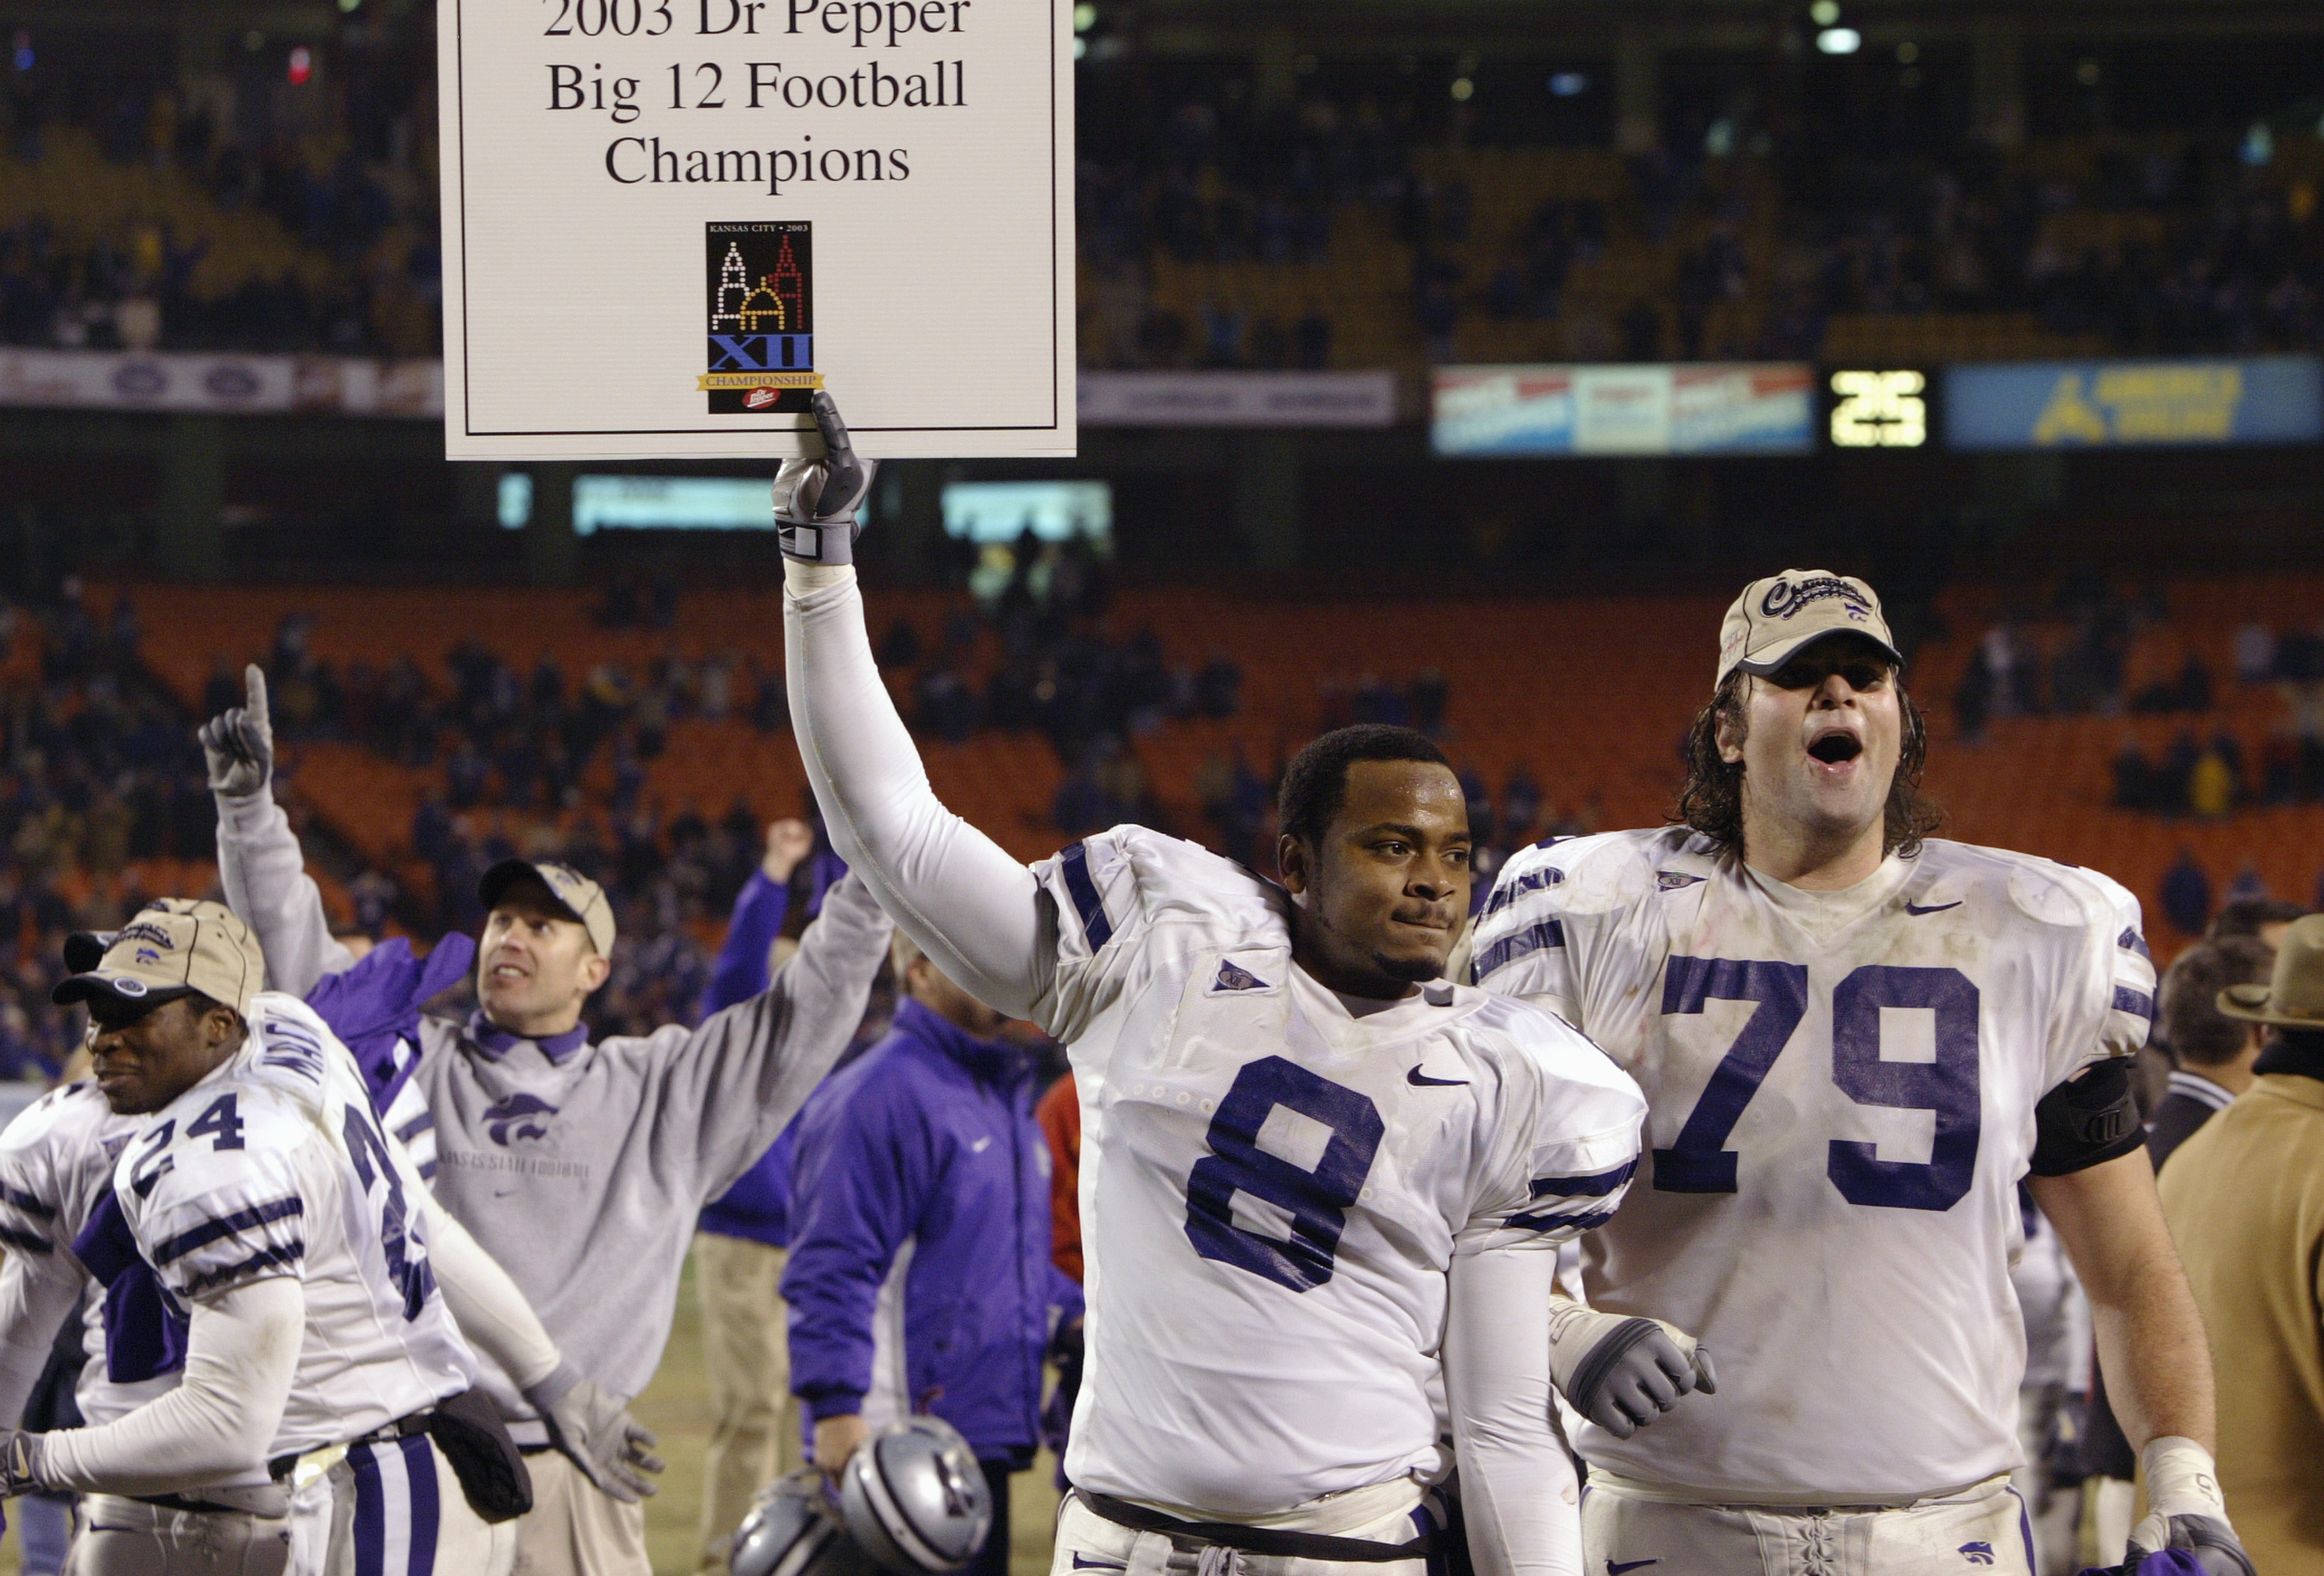 KANSAS CITY, MO - DECEMBER 6:  Defensive back James McGill #8 and tackle Jon Doty #79 of the Kansas State Wildcats celebrate after defeating the Oklahoma Sooners in the Dr. Pepper Big 12 Championship on December 6, 2003 at Arrowhead Stadium in Kansas City